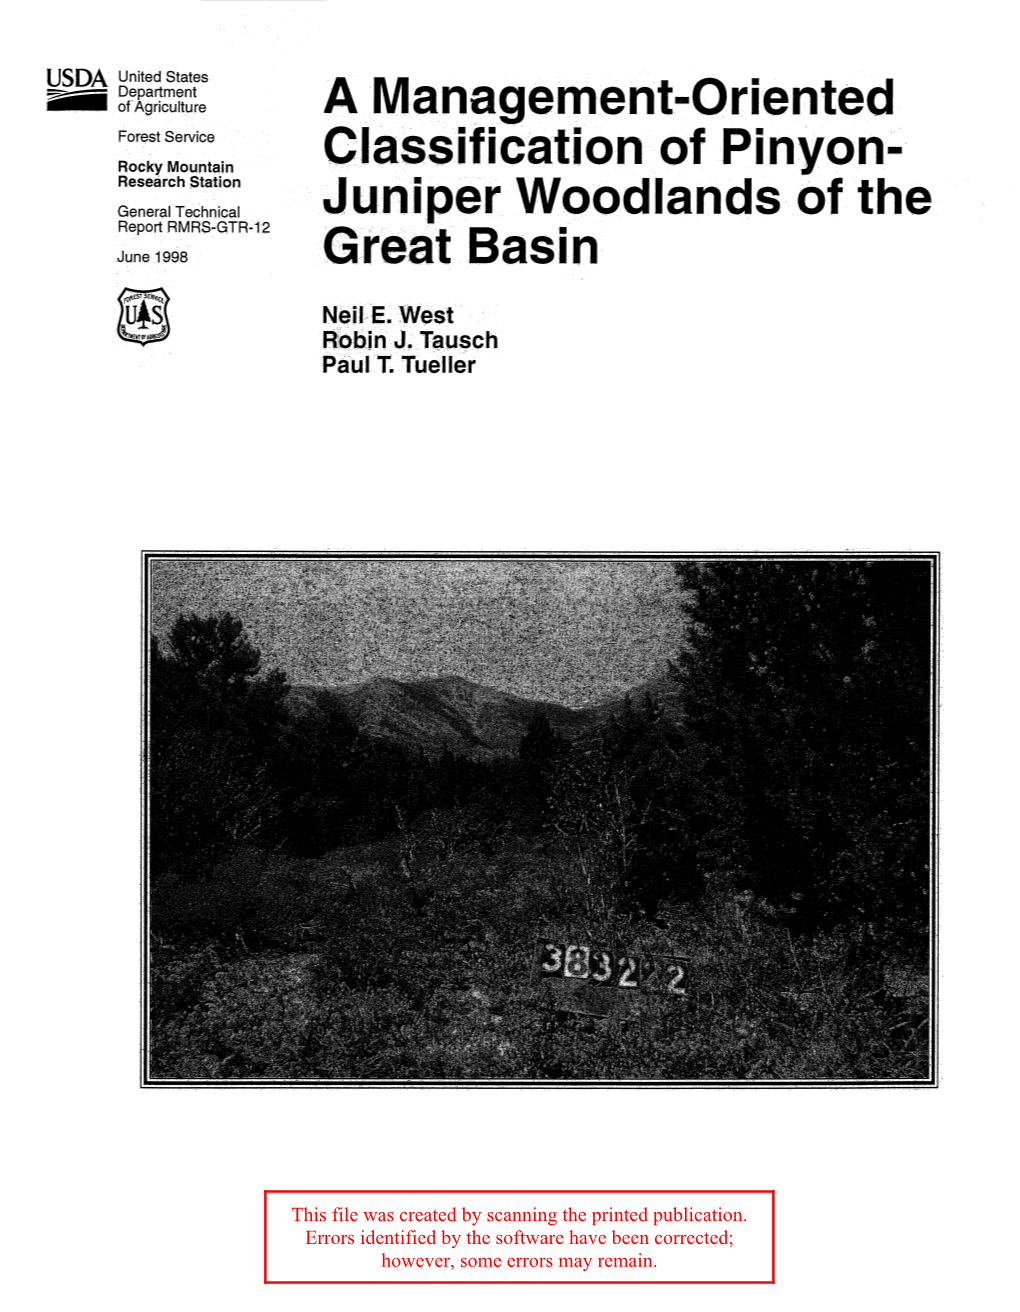 A Management-Oriented Classification of Pinyon-Juniper Woodlands of the Great Basin